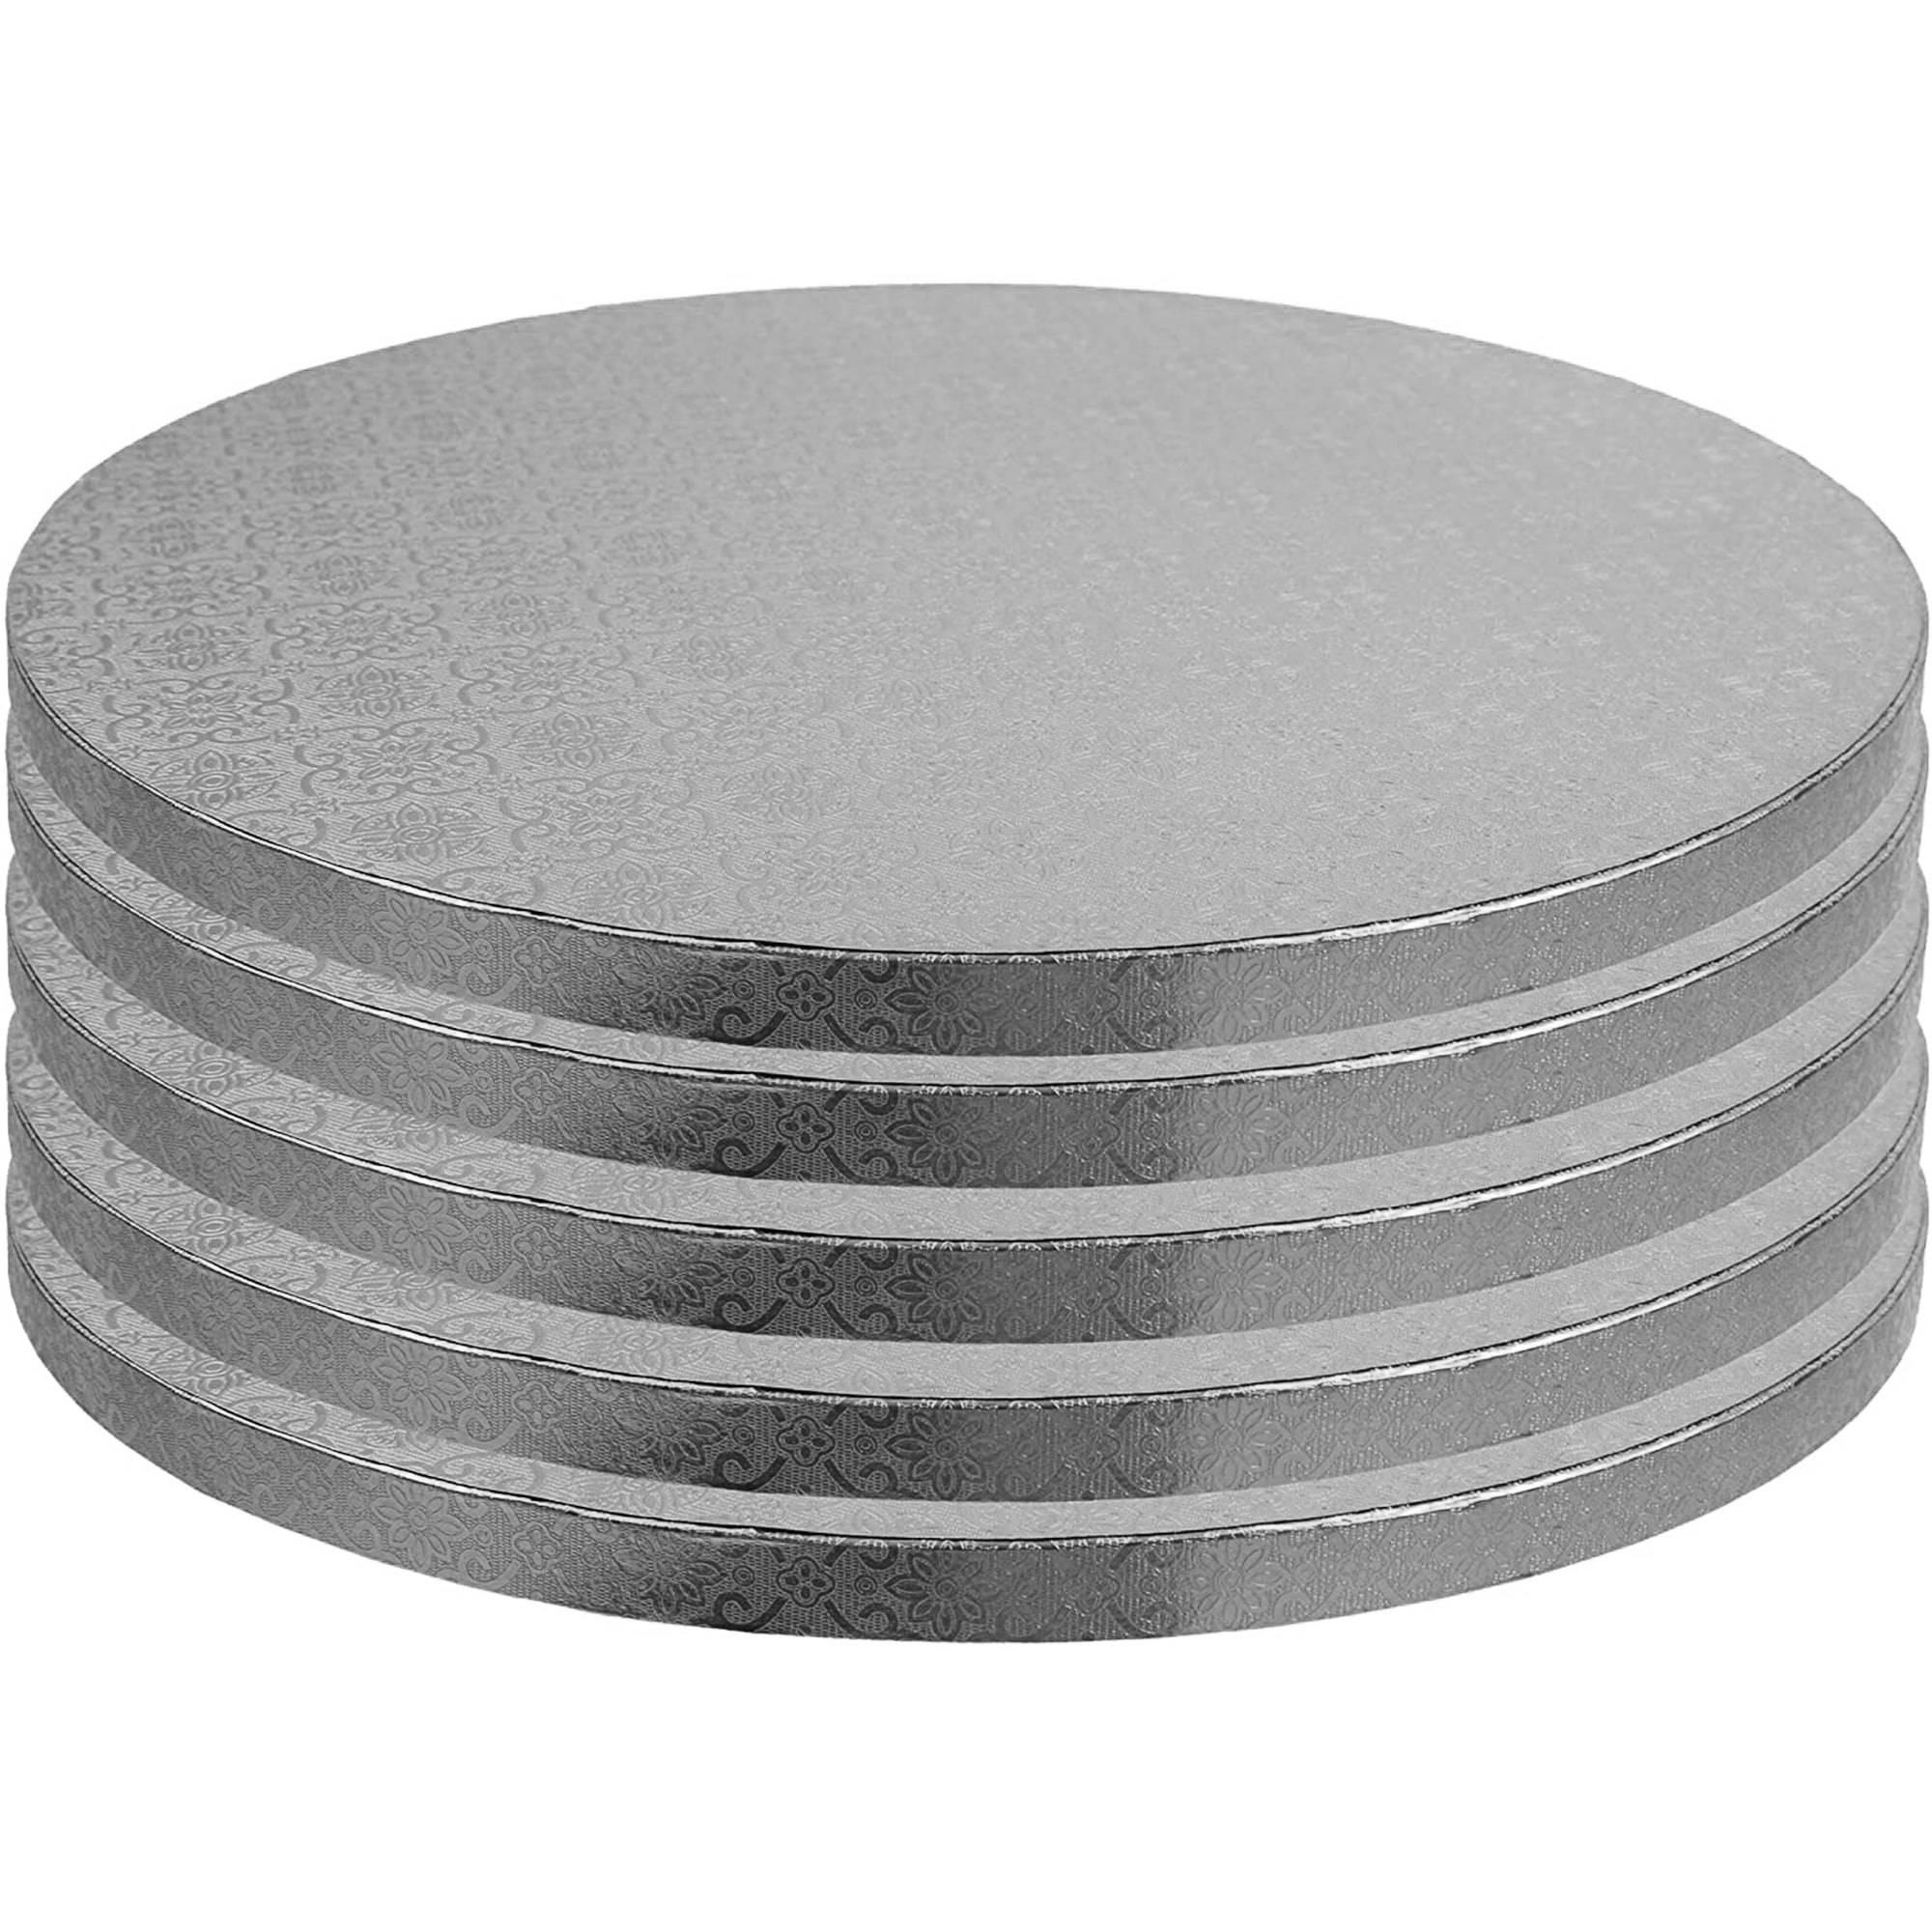 Pack of 1 16 x 14 Oblong Silver Cake Drum 12mm Thick 